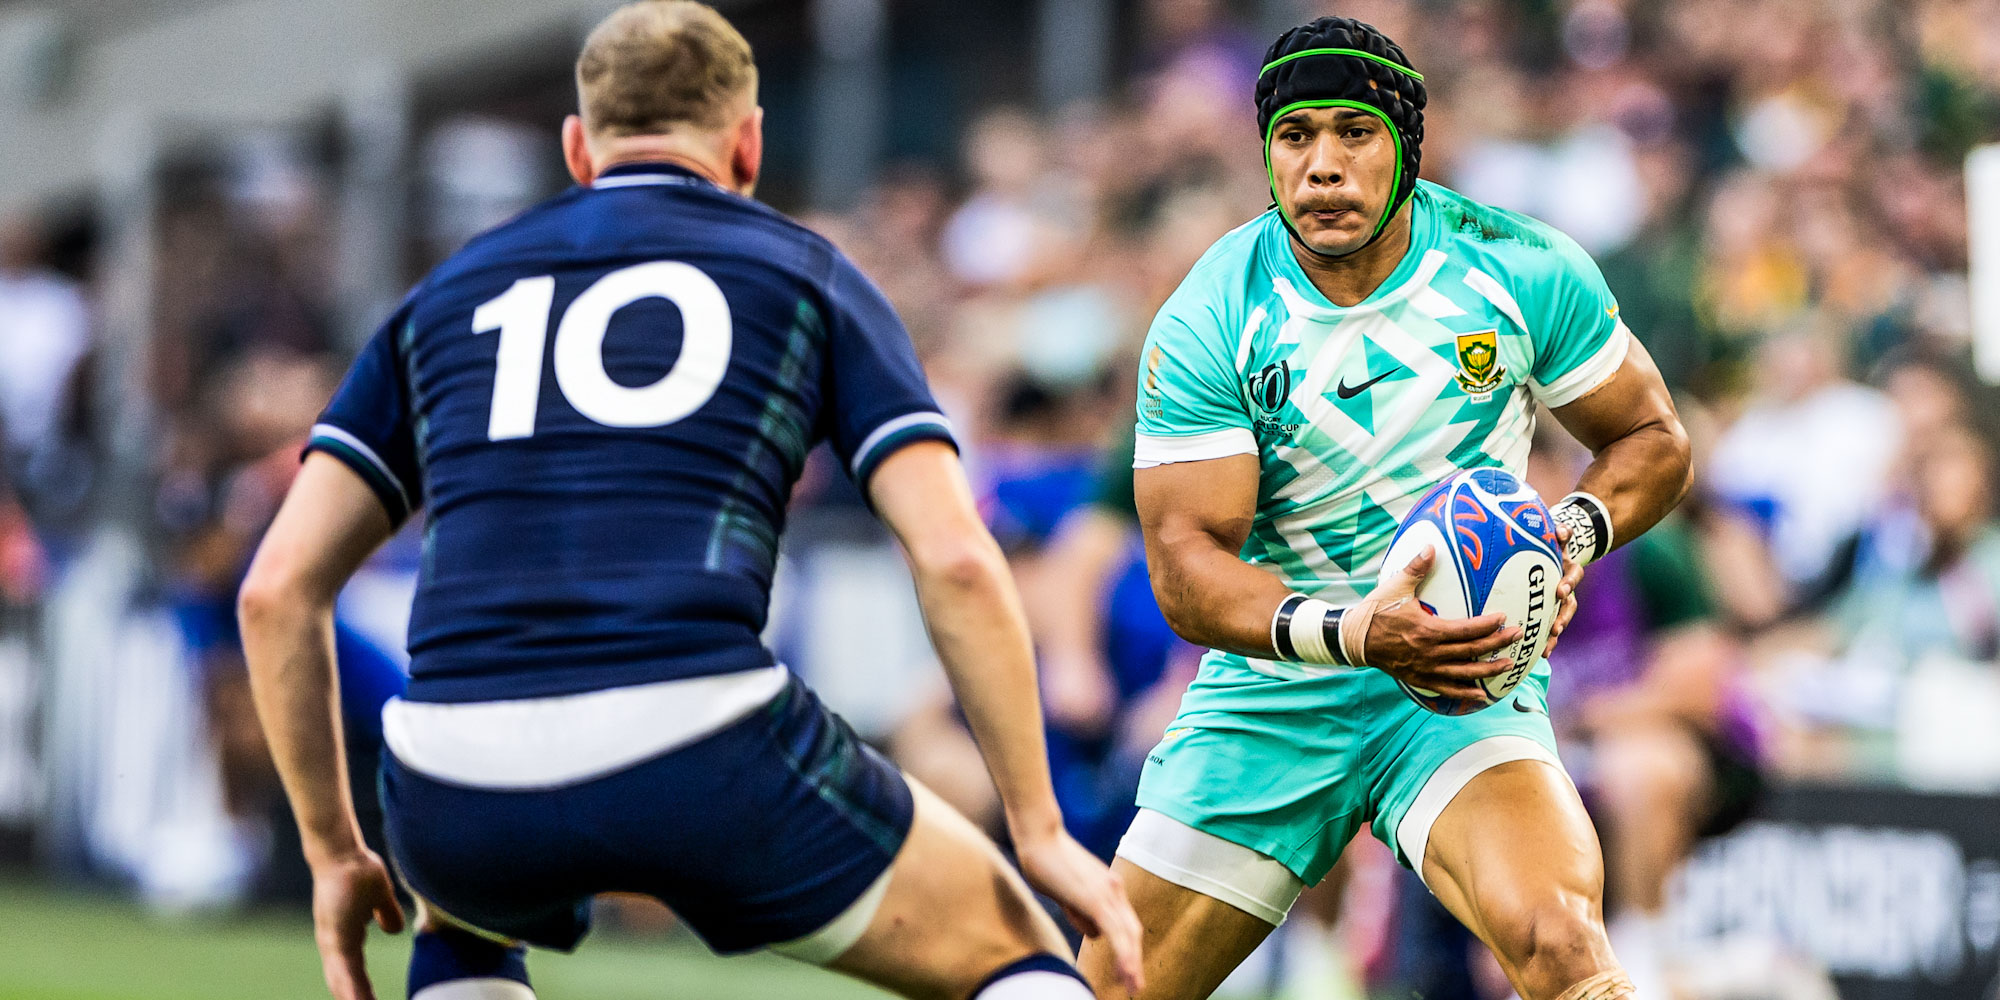 Cheslin Kolbe in action against Scotland in the RWC opener two weekends ago.